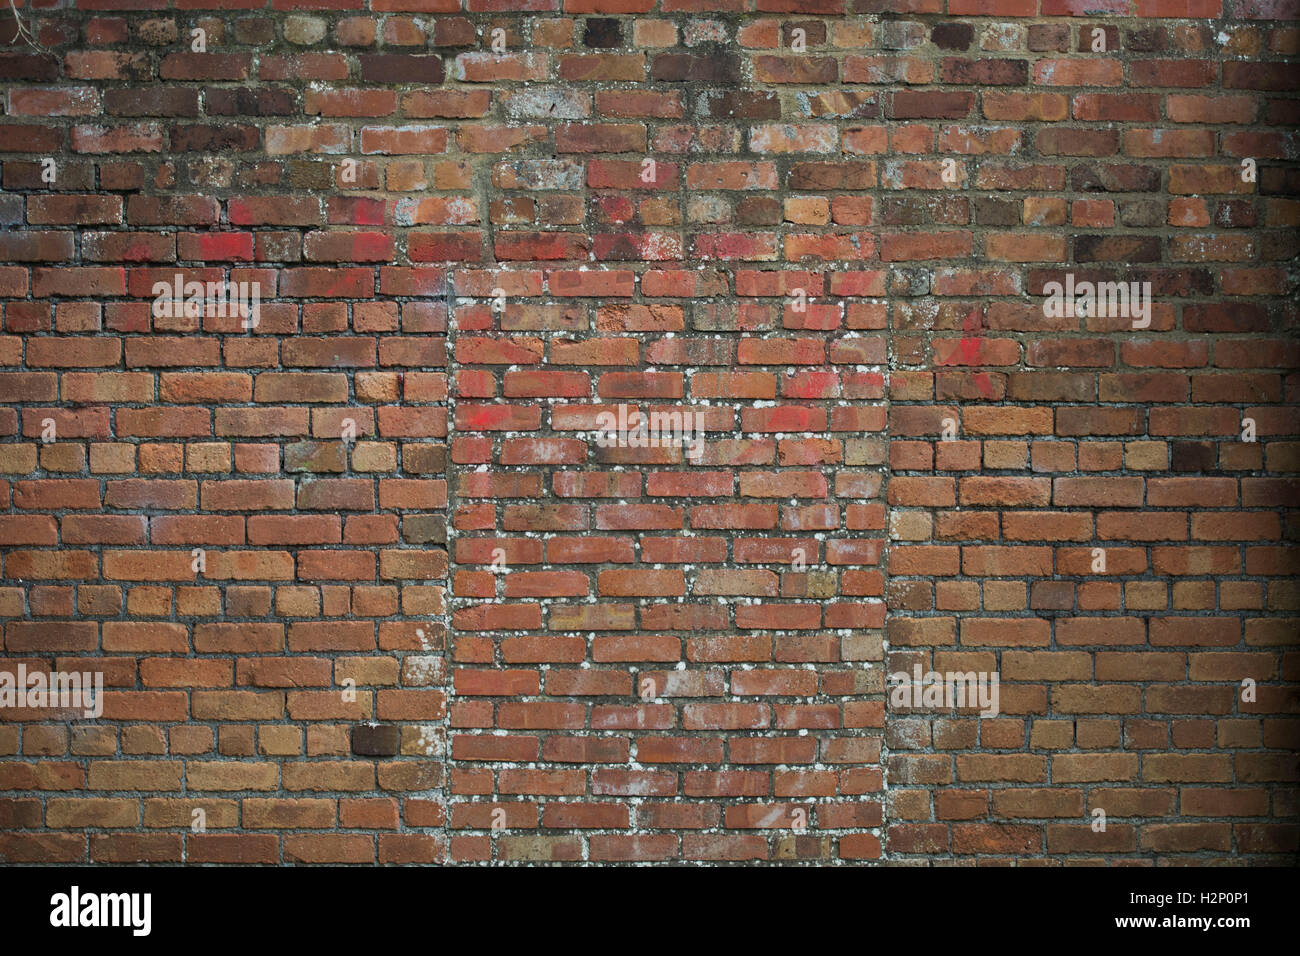 A sold red brick wall. Stock Photo